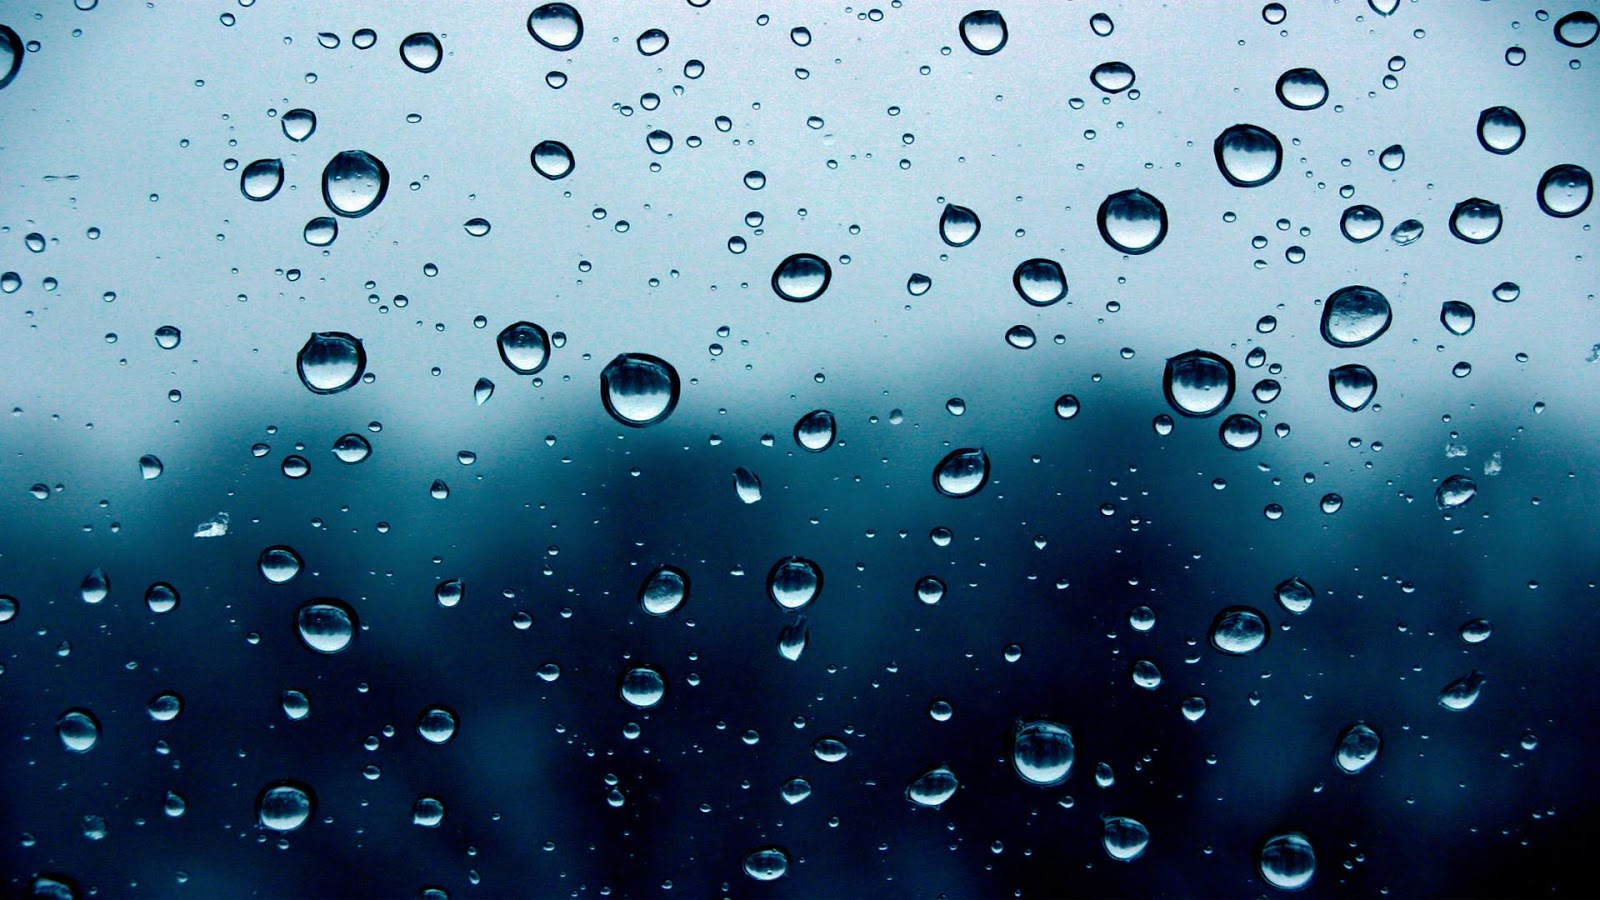 Water Drops HD Live Wallpaper - Android Apps on Google Play